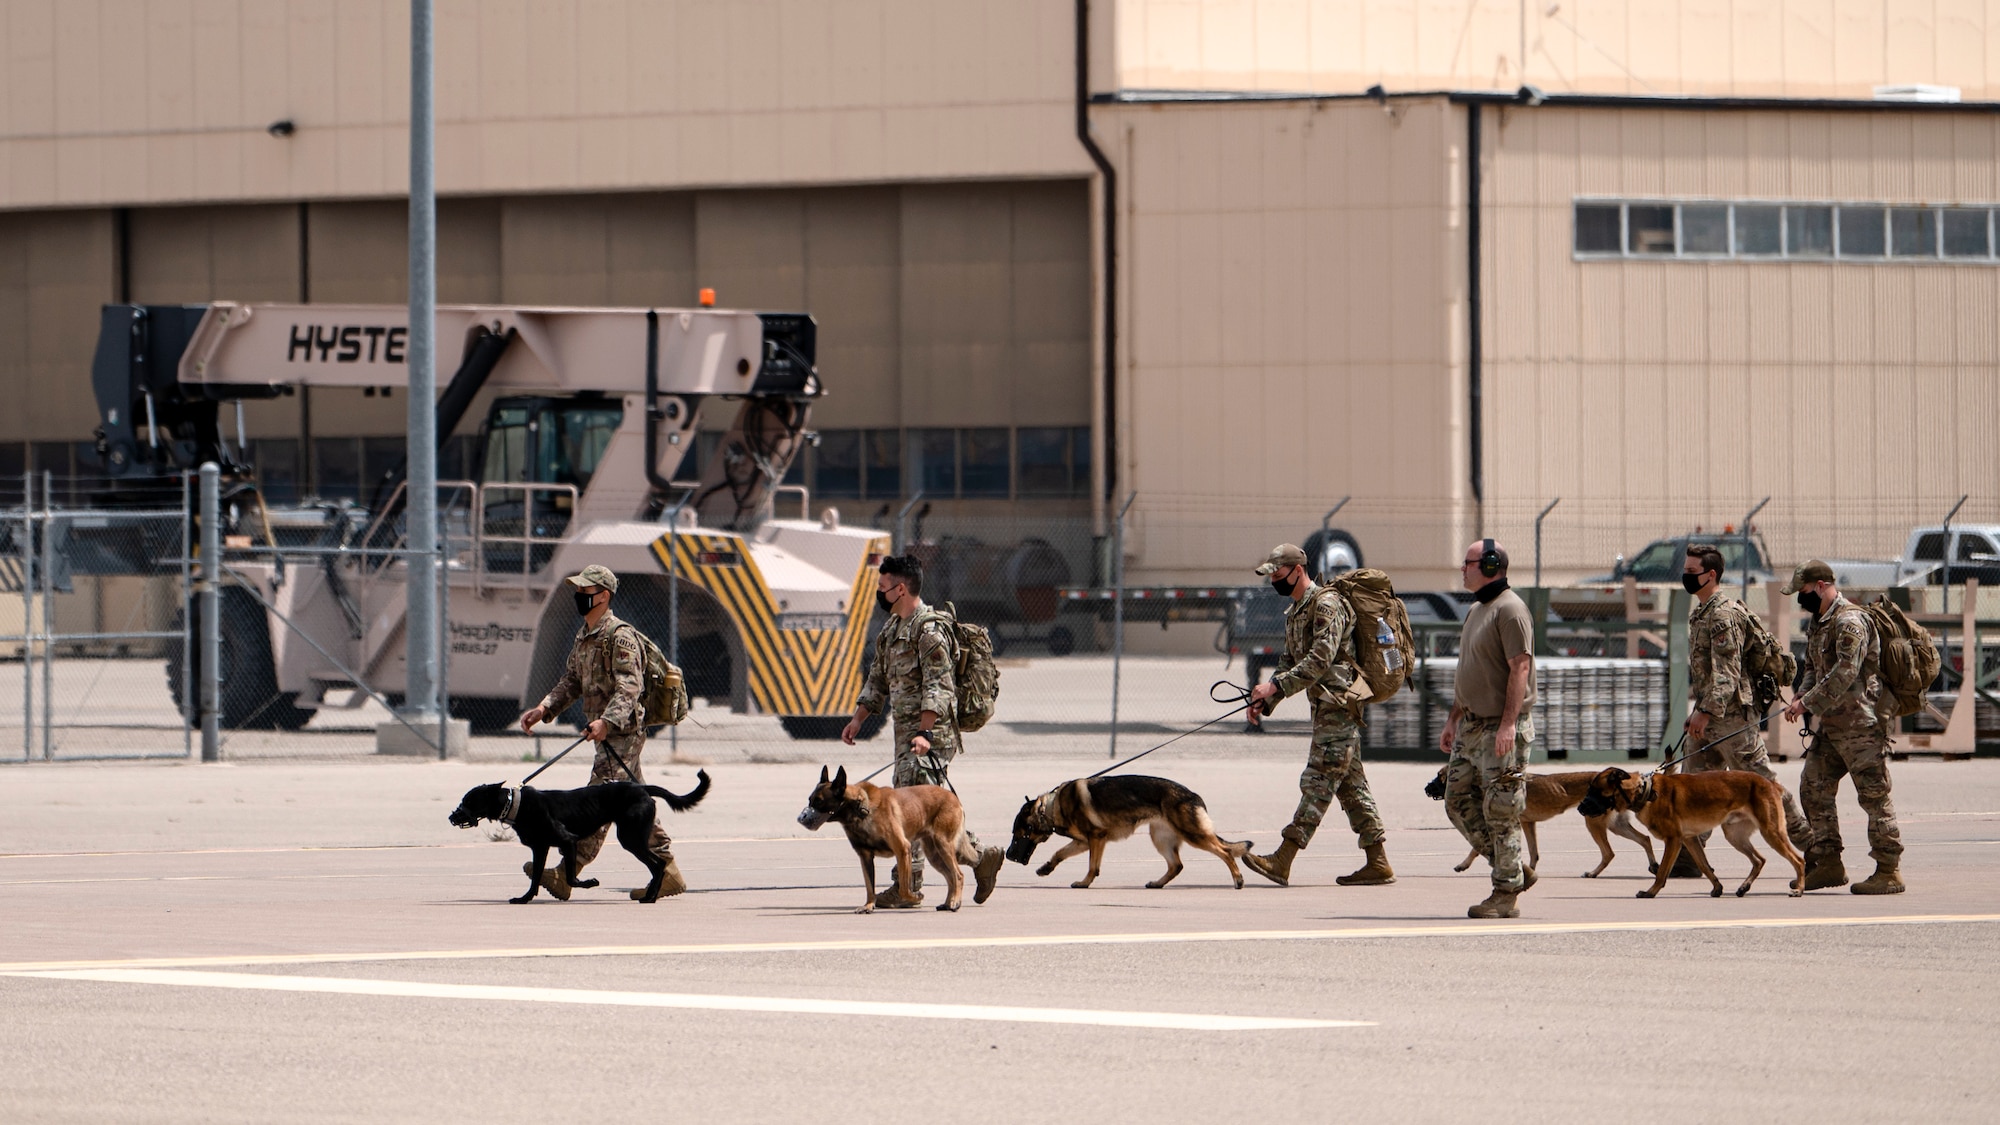 U.S. Air Force Airmen assigned to the 822nd Base Defense Squadron K-9 unit proceed to an in-processing line after arriving at Holloman Air Force Base, New Mexico, Aug. 29, 2021. The 822nd BDS were tasked to provide an enhanced security presence at Holloman AFB in support of Task Force – Holloman. The Department of Defense, through U.S. Northern Command, and in support of the Department of Homeland Security, is providing transportation, temporary housing, medical screening, and general support for at least 50,000 Afghan evacuees at suitable facilities, in permanent or temporary structures, as quickly as possible. This initiative provides Afghan personnel essential support at secure locations outside Afghanistan. (U.S. Air Force photo by Staff Sgt. Devin Boyer)